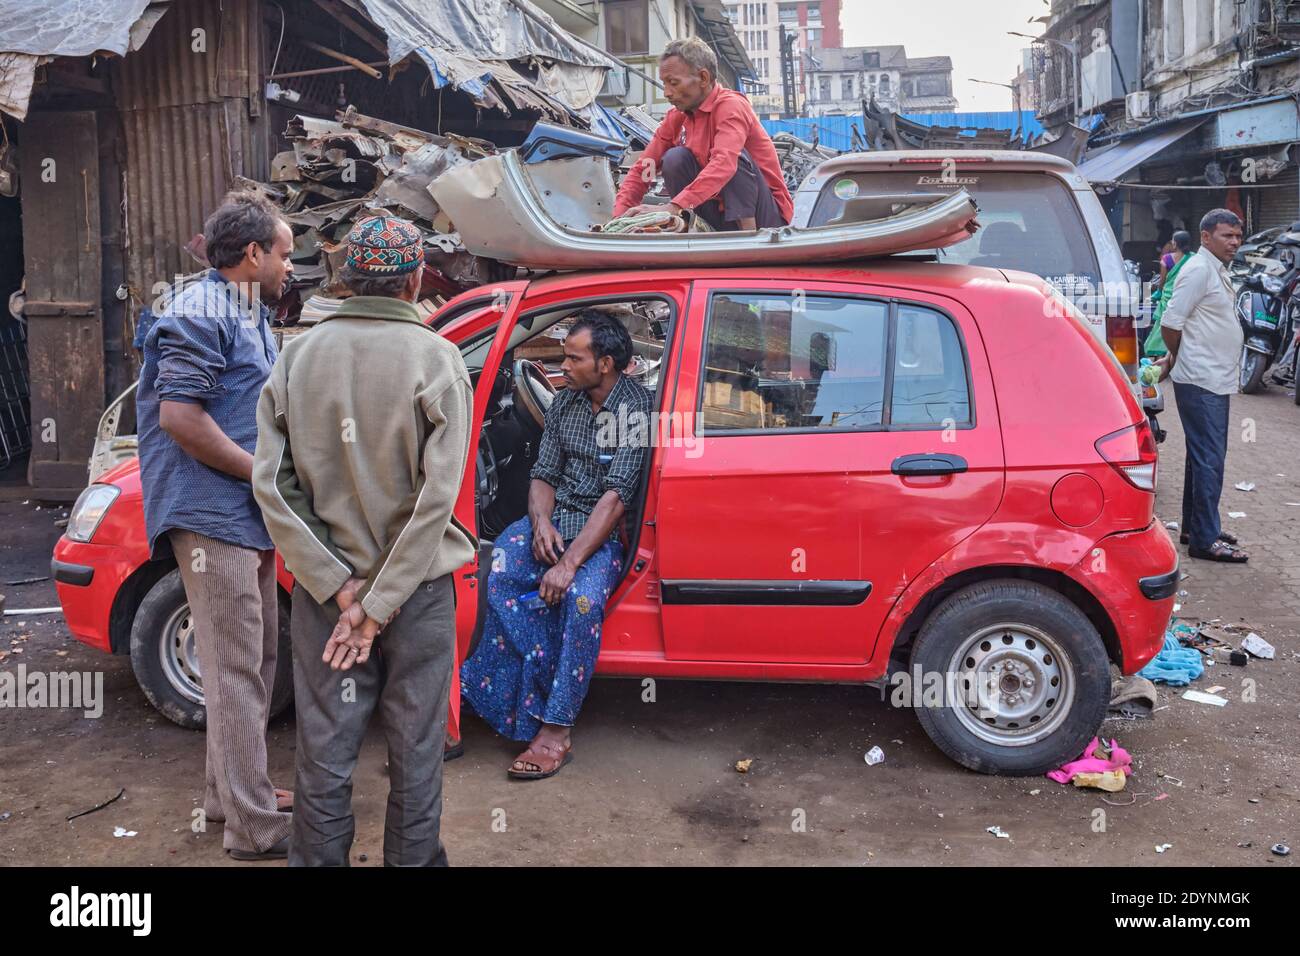 Dismantling an old car, the employee of a junk shop sits on the roof of another discarded car; Chor Bazar / Bazaar (Thieves' Market), Mumbai, India Stock Photo